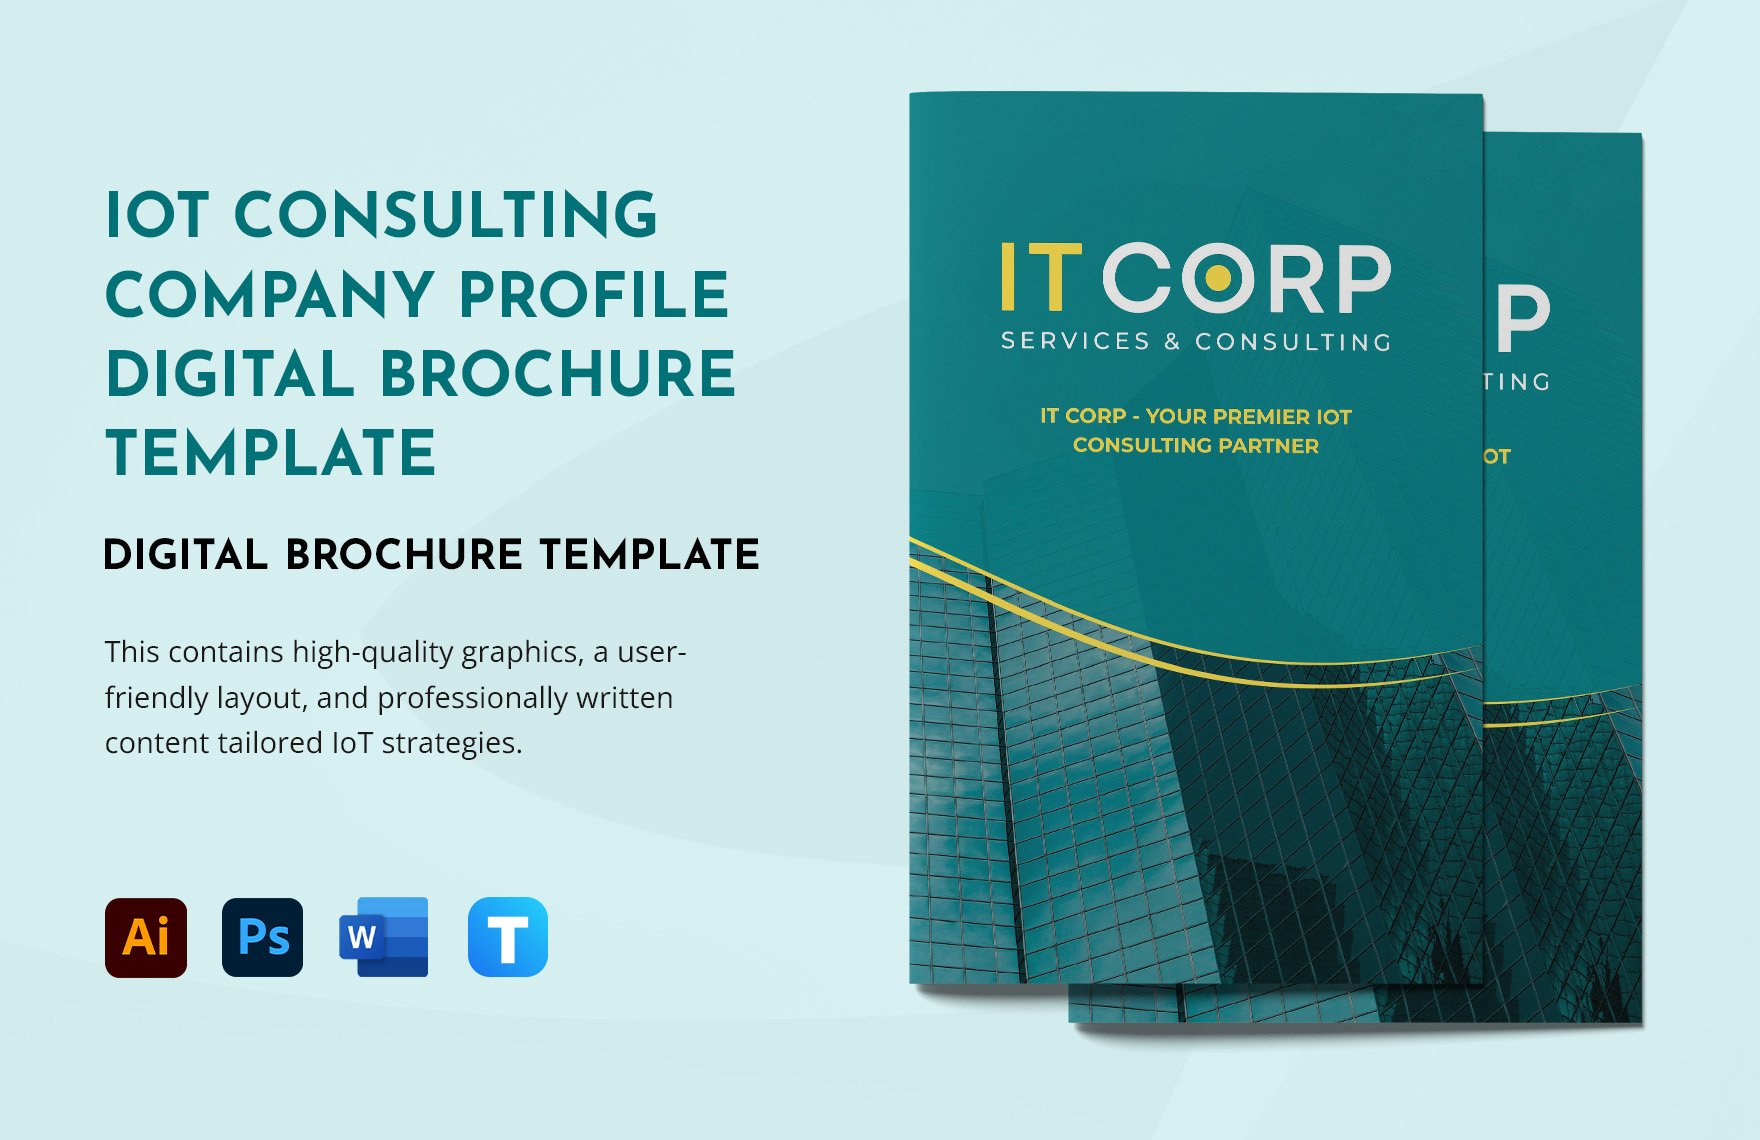 IoT Consulting Company Profile Digital Brochure Template in Word, Illustrator, PSD